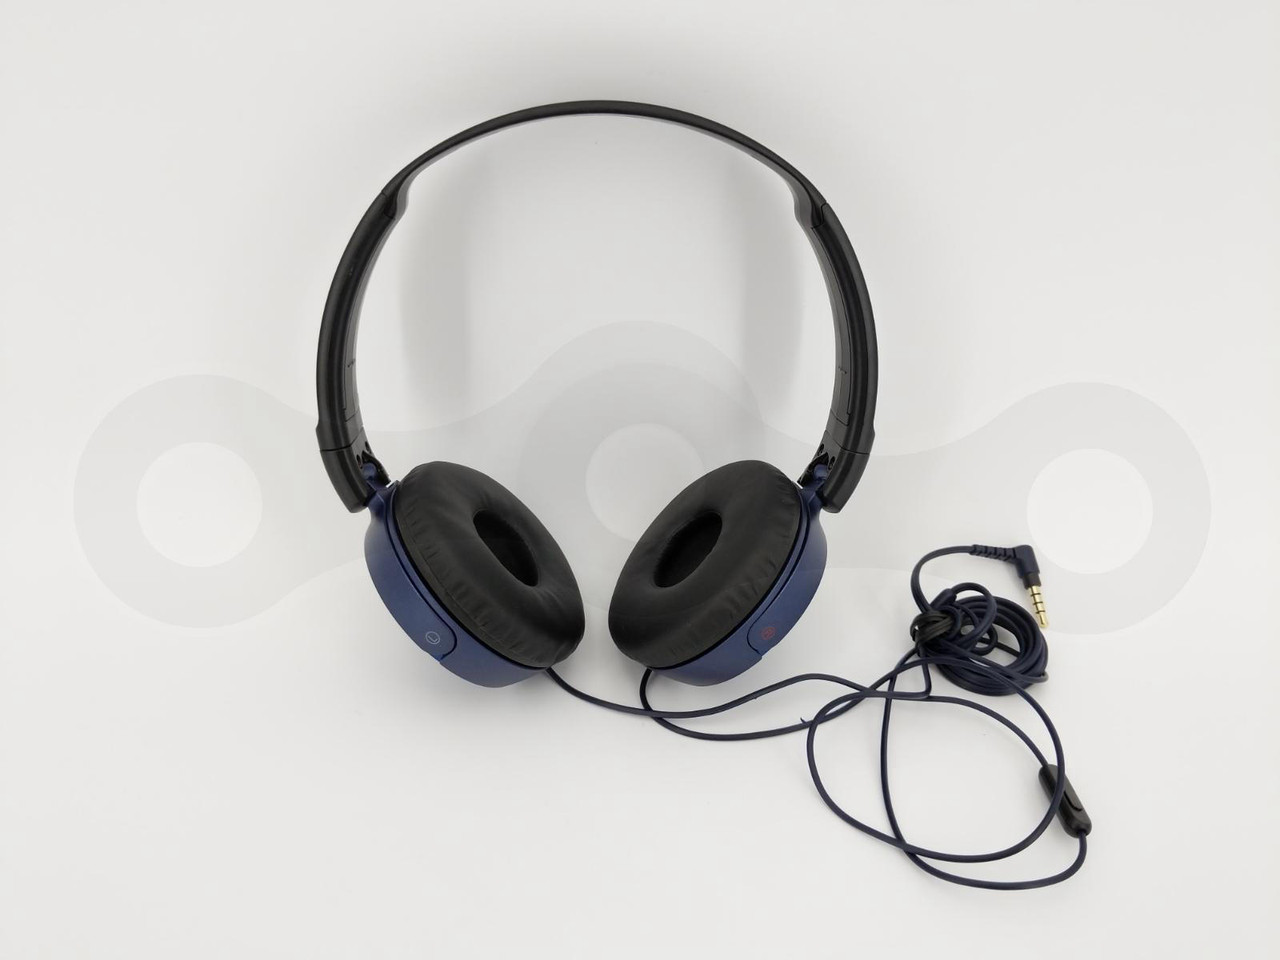 BLUE BLACK HEADPHONES COLLAPSIBLE MIC WIRED HEADBAND SONY MDR-ZX310 ONLY CORDED